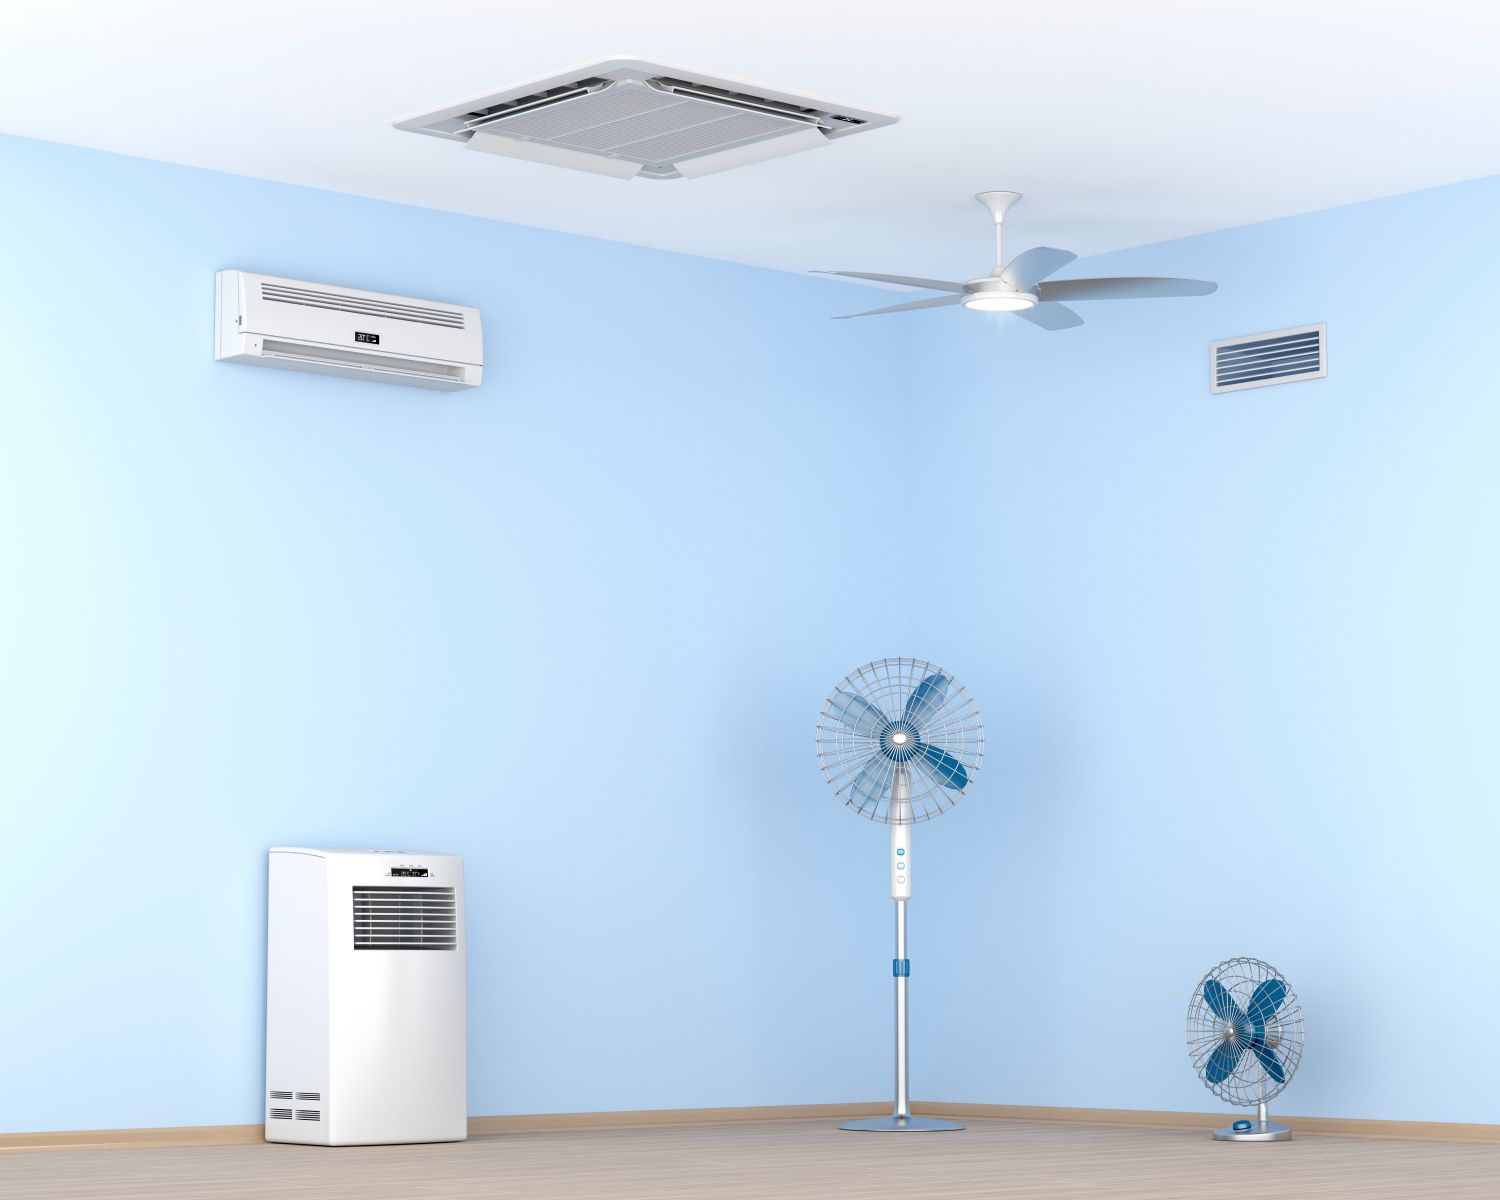 Various types of cooling devices including AC